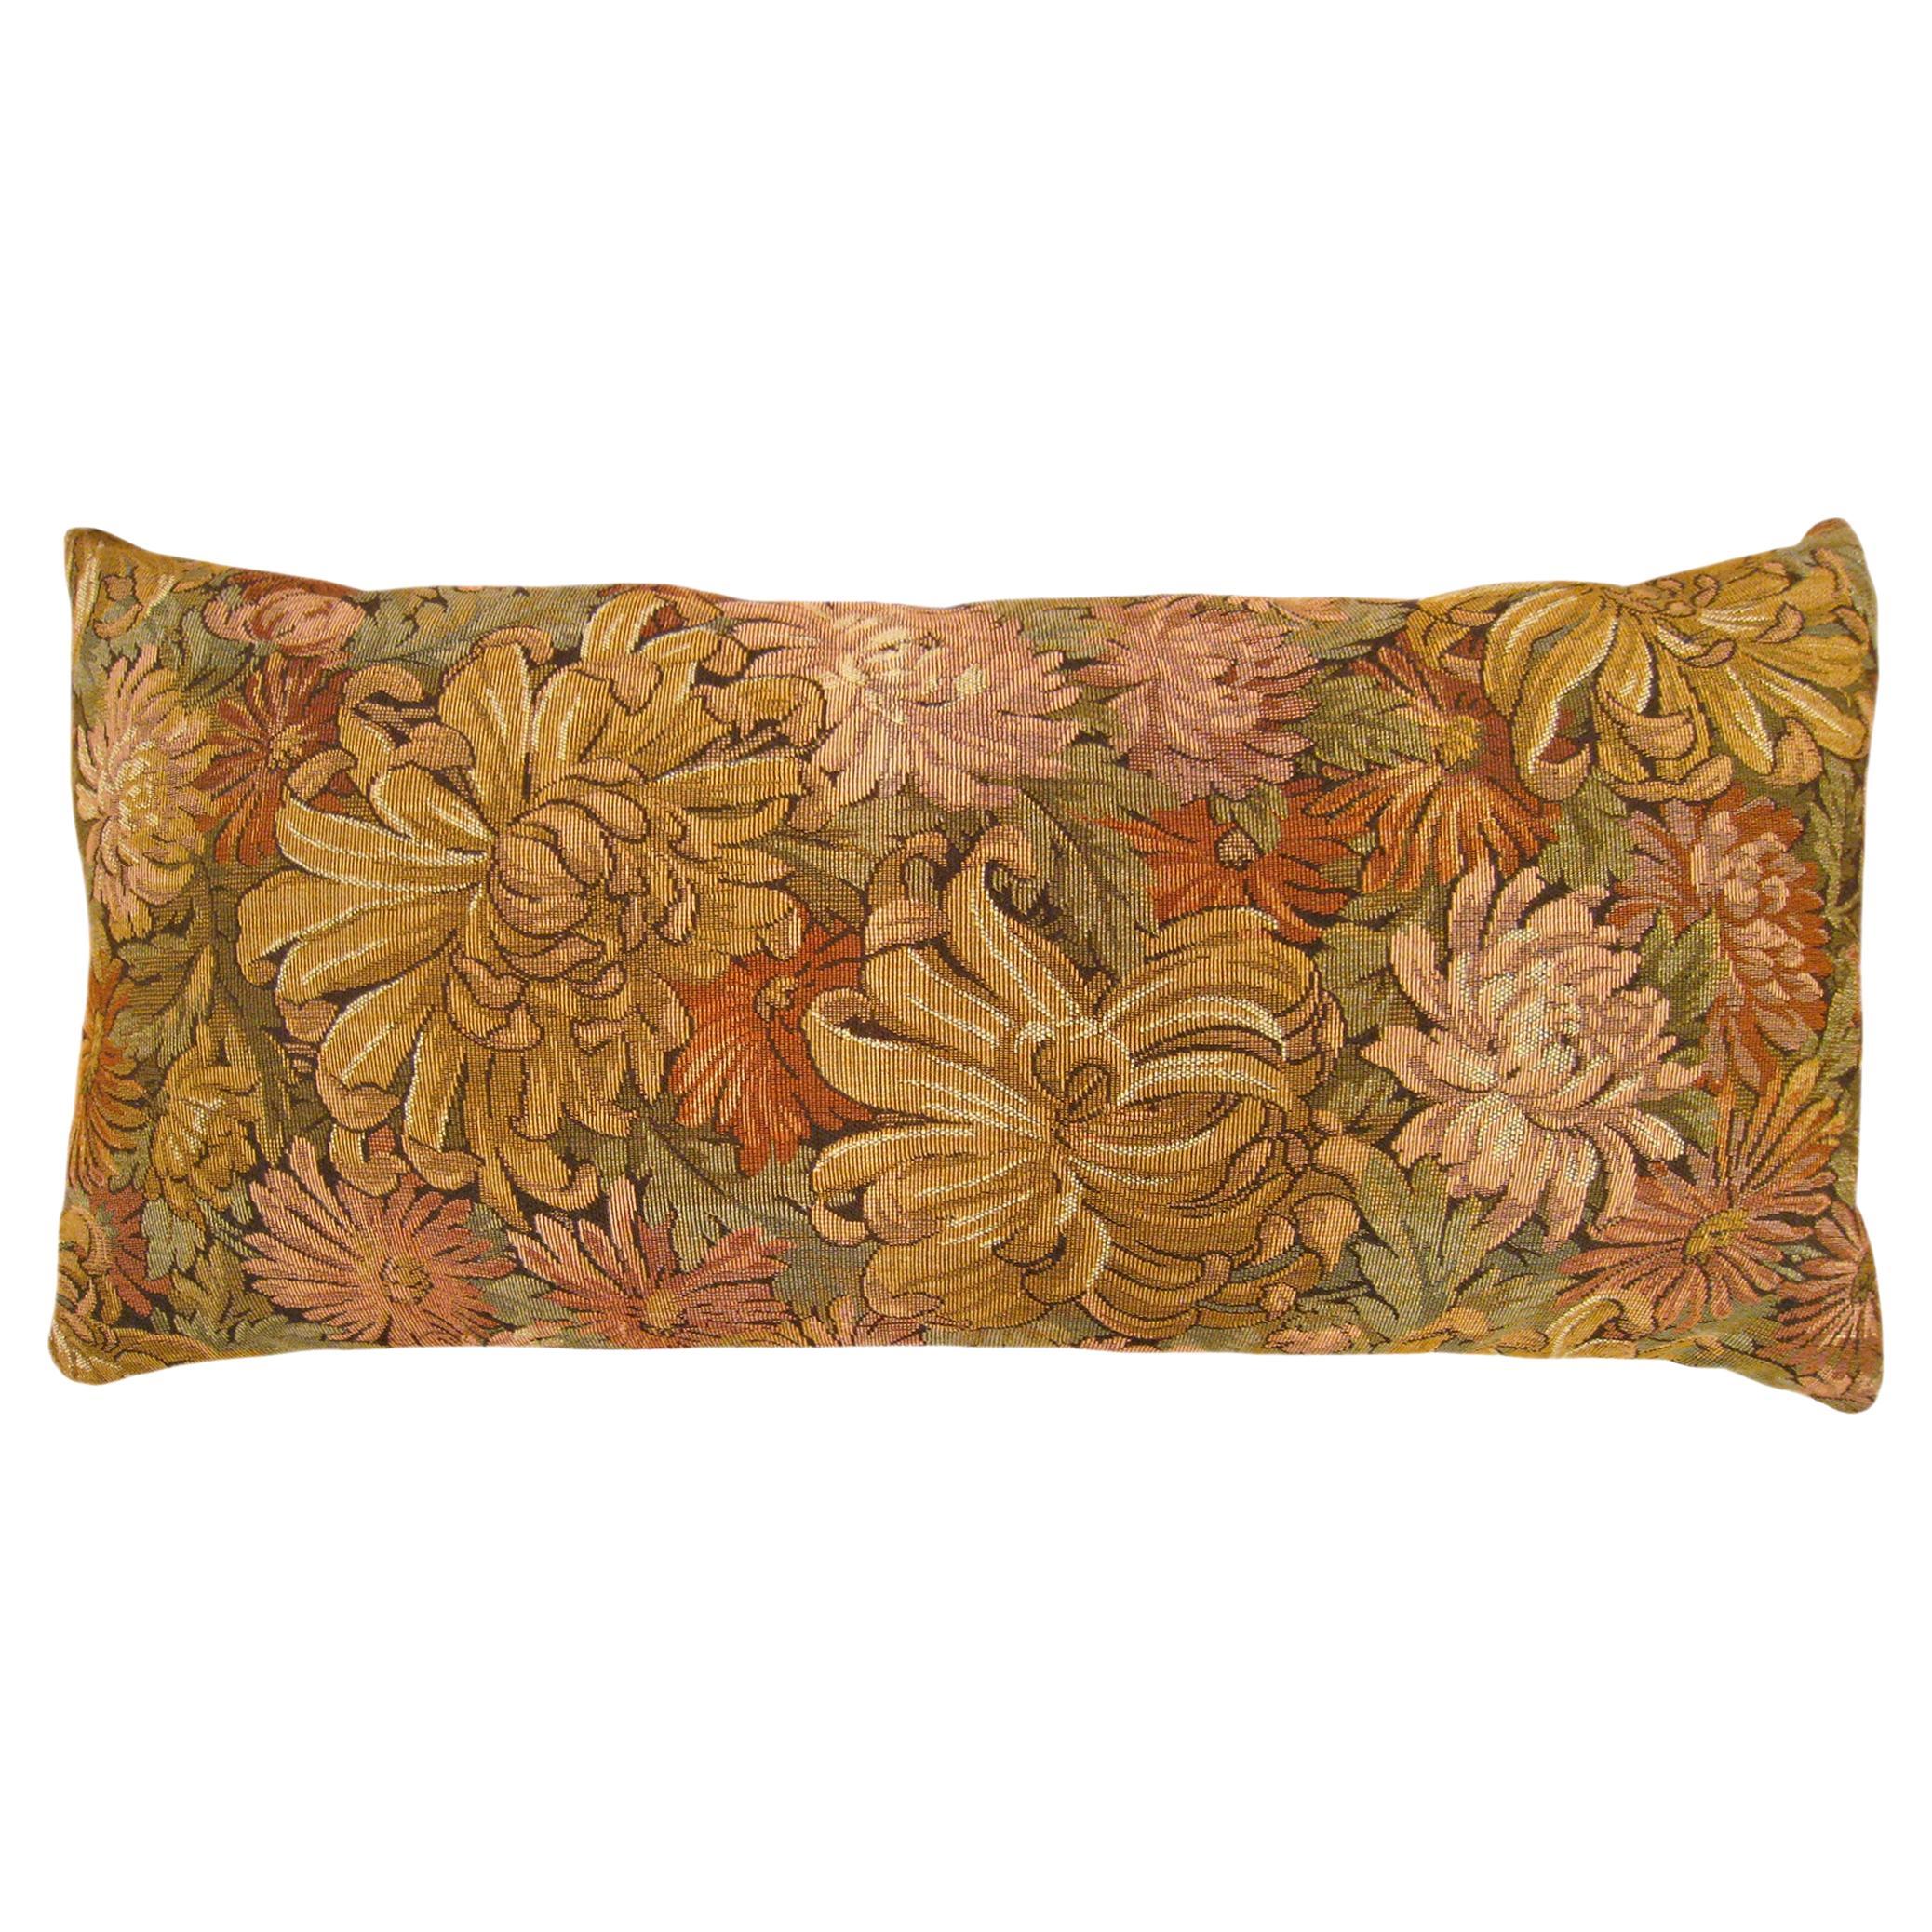 Decorative Antique Jacquard Tapestry Pillow with Floral Elements